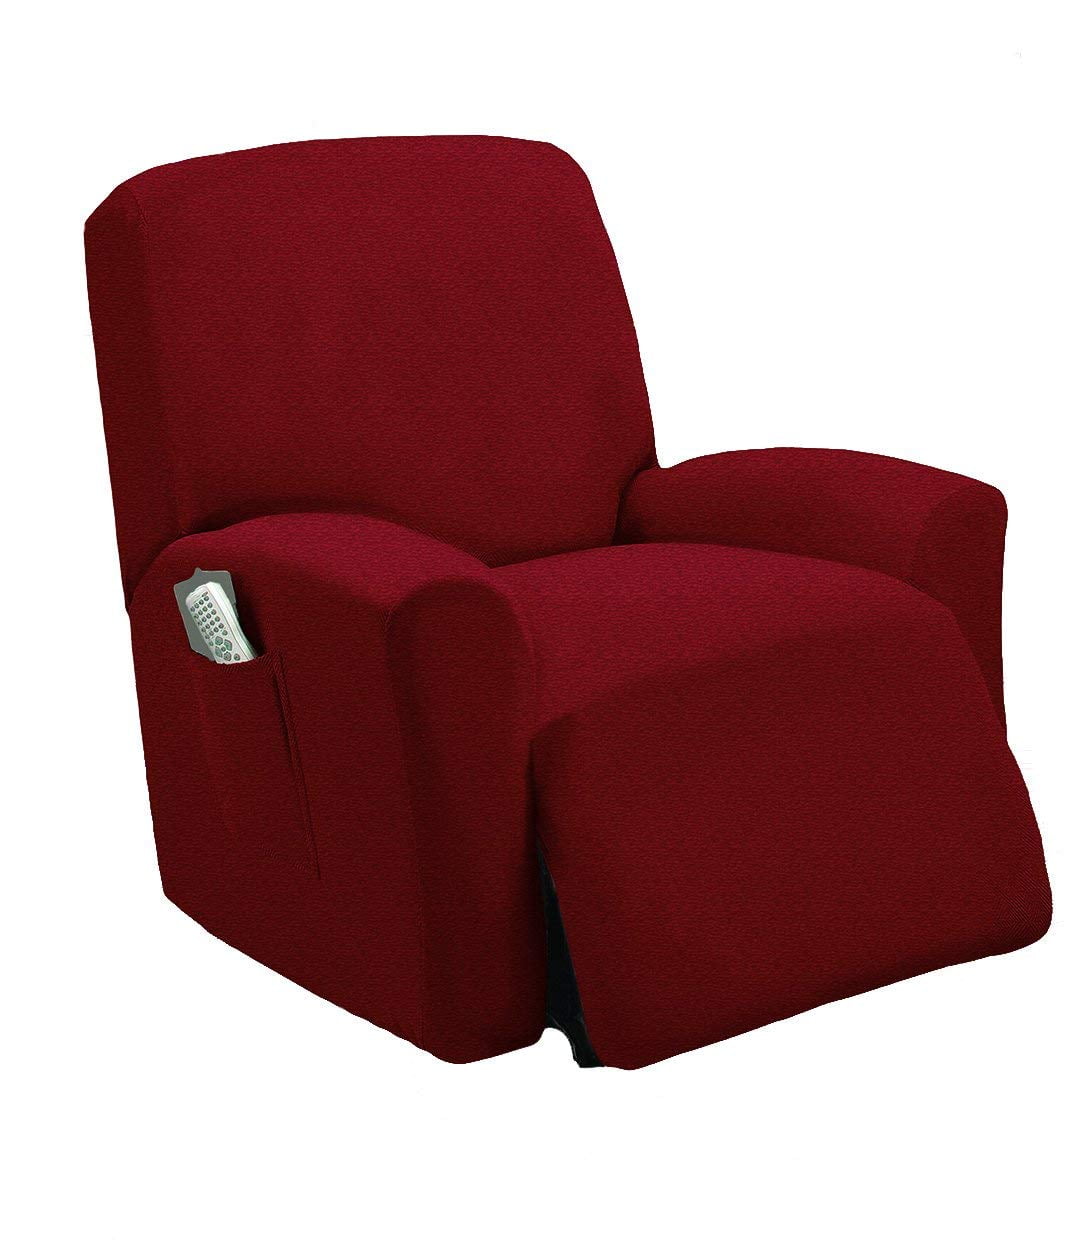 Pique Stretch Fit Furniture Chair Recliner Lazy Boy Cover Slipcover Many Colors 